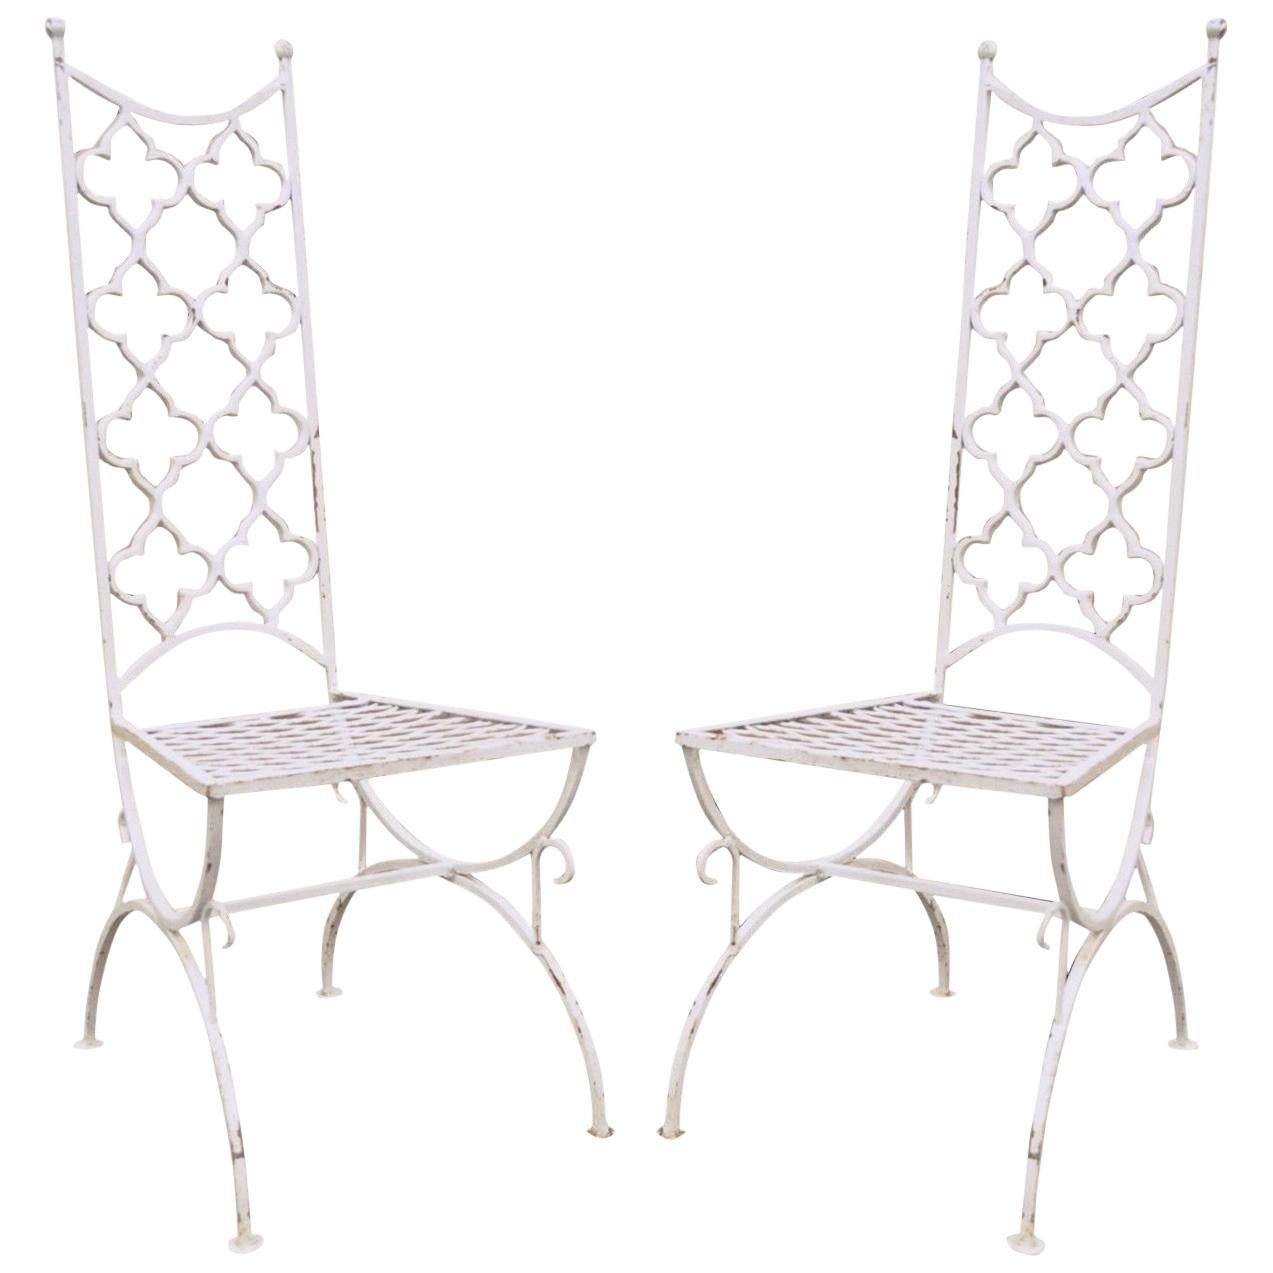 Vintage Hollywood Regency Wrought Iron Clover Fretwork Curule Side Chairs, Pair